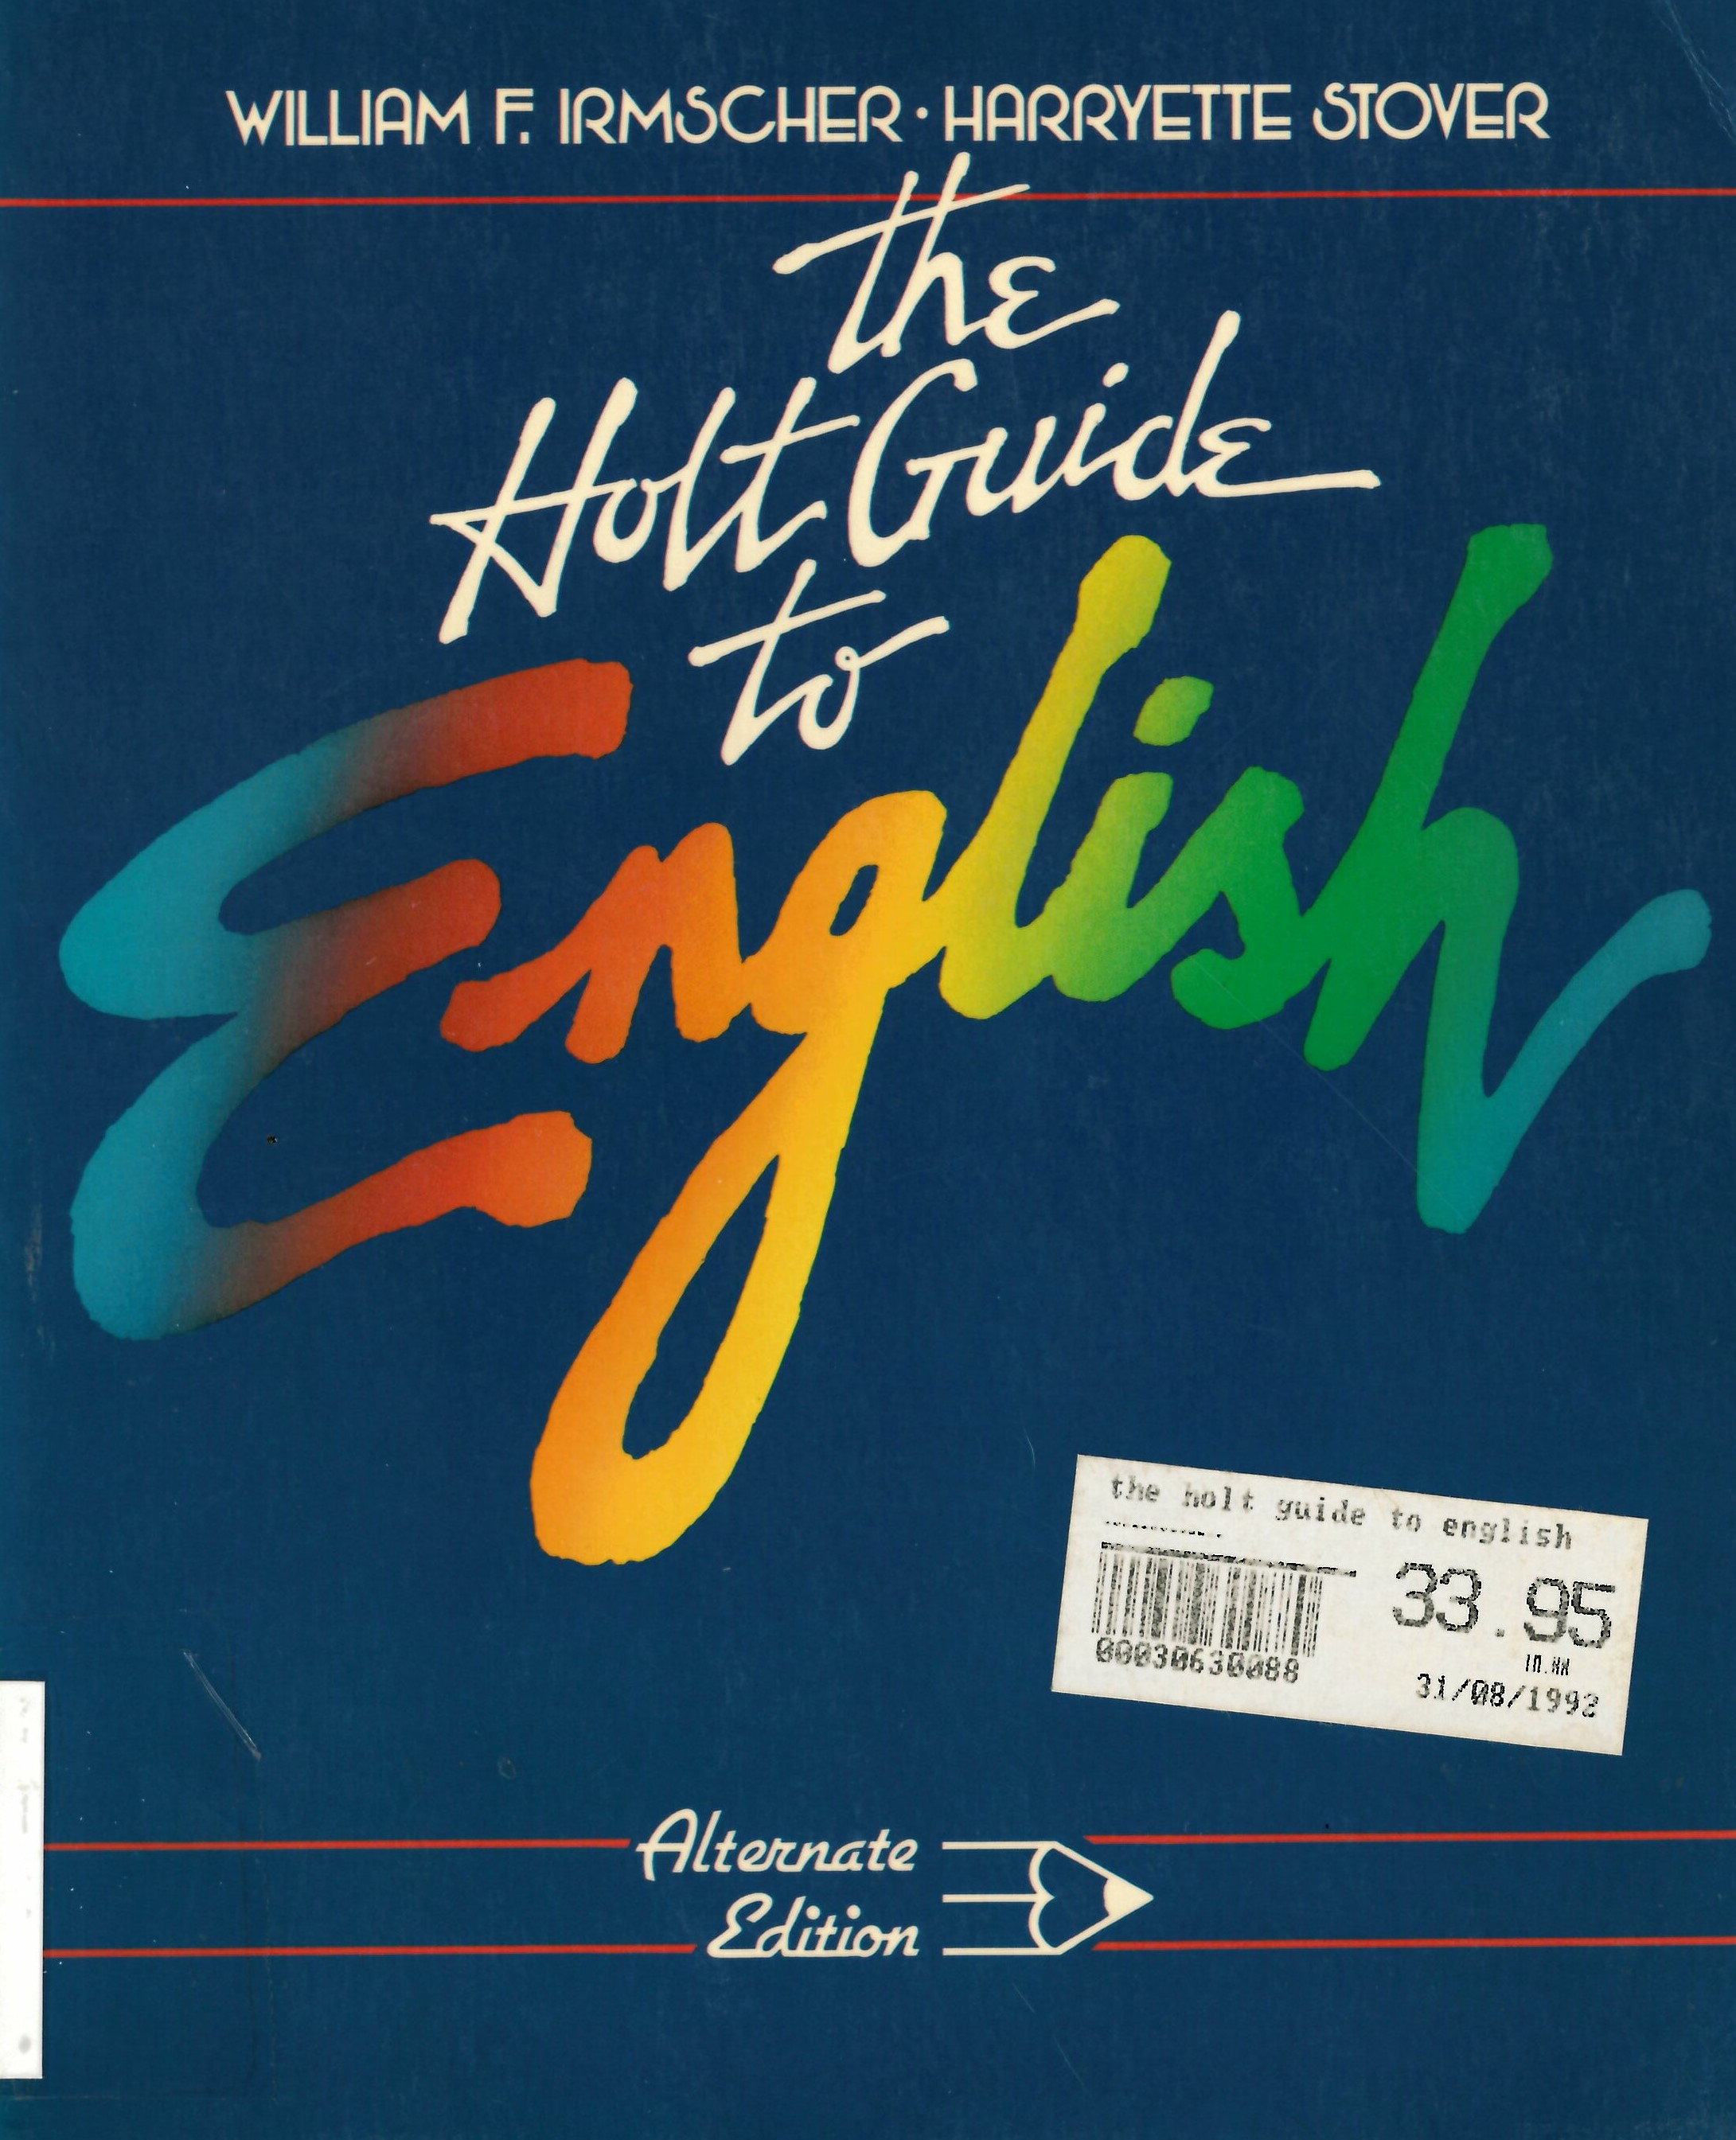 The Holt guide to English